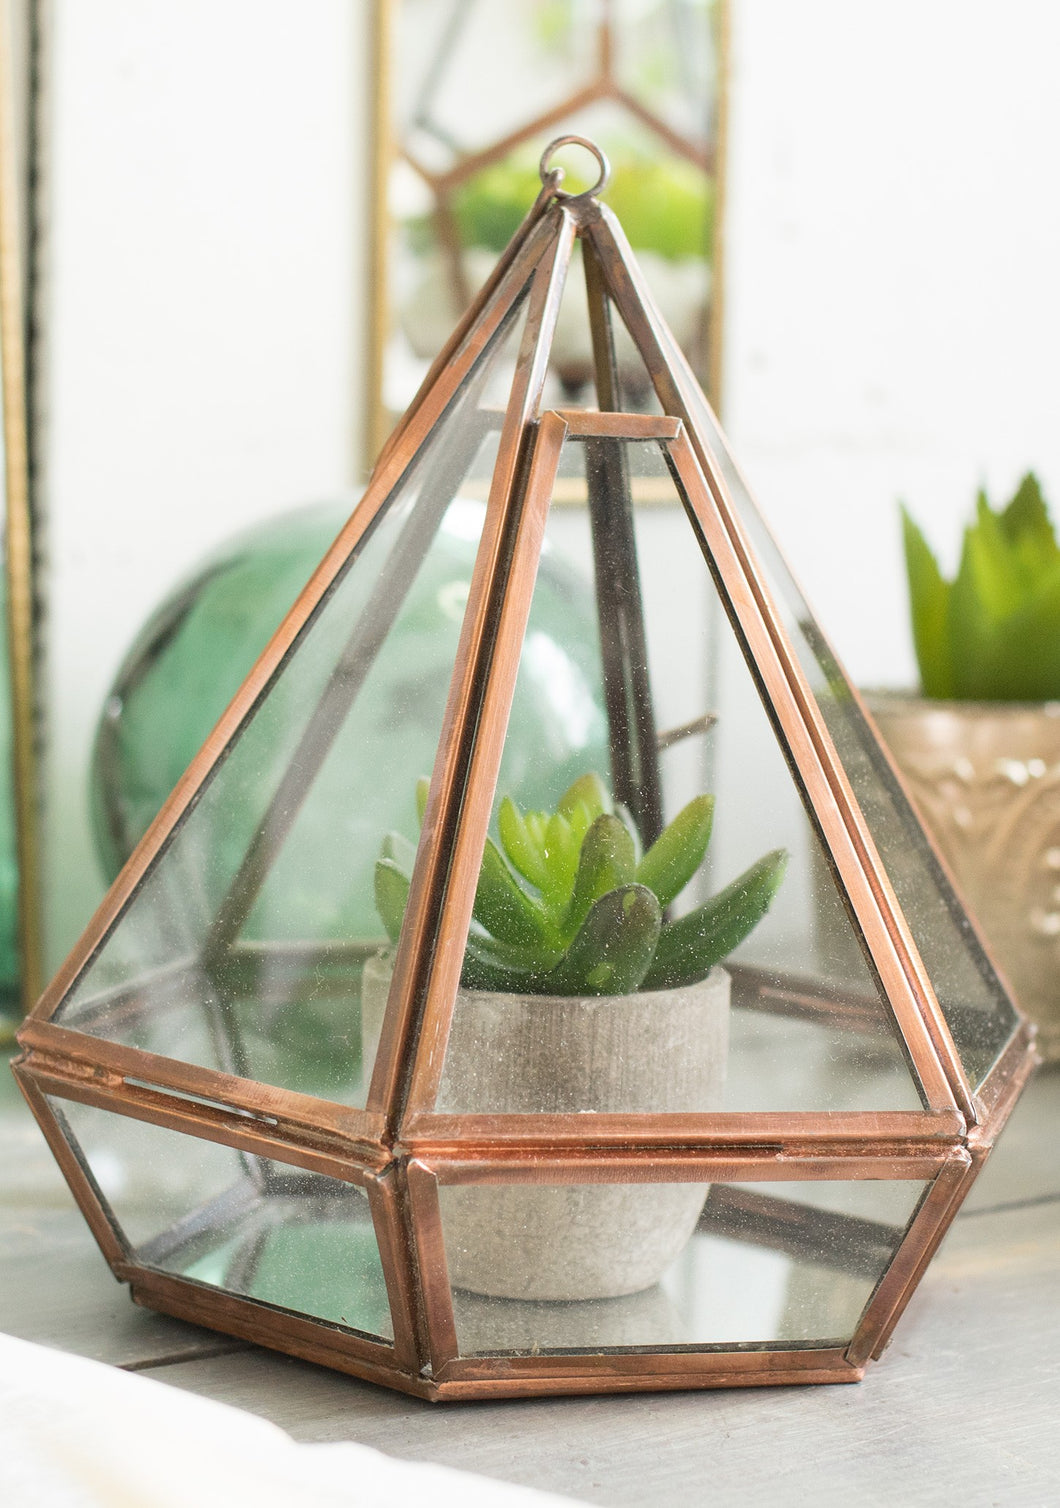 Recycled metal and glass Hexagonal Terrarium/Candle Holder